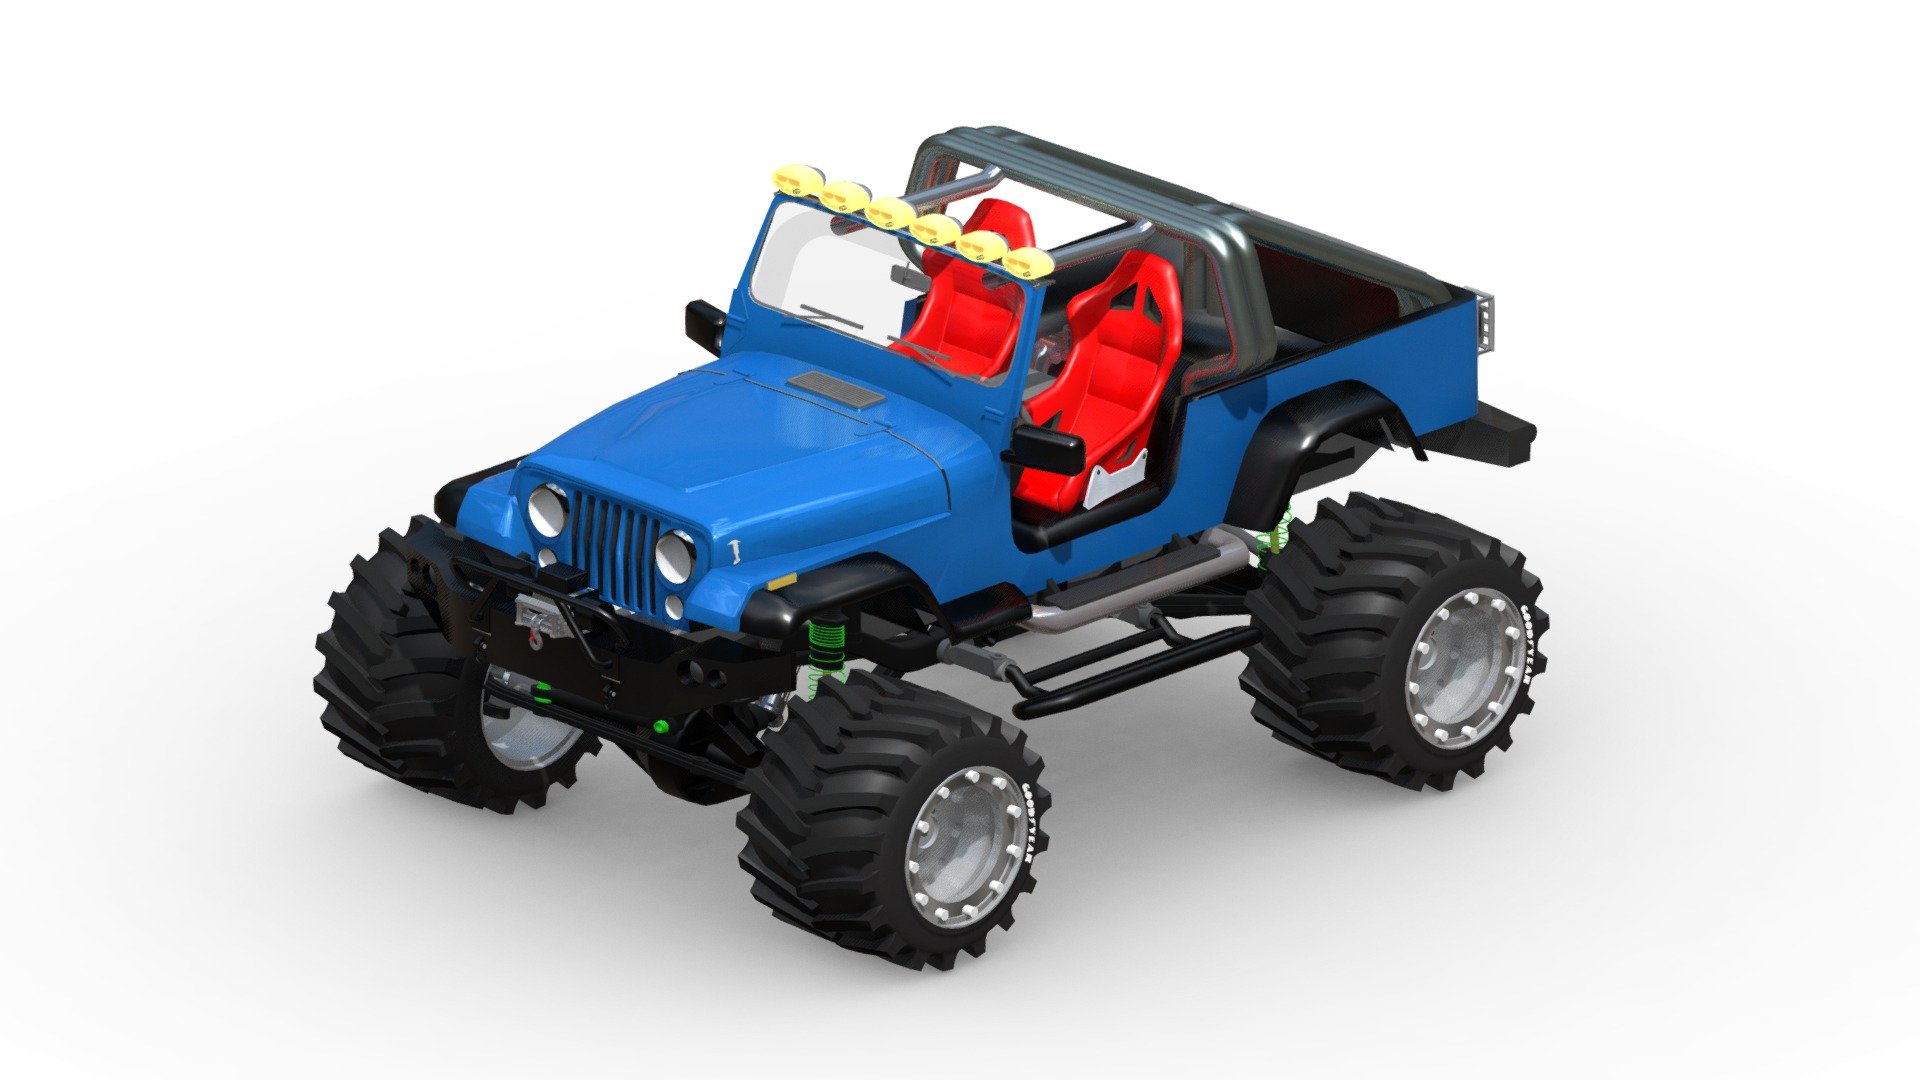 This is an accurate 3D model of the Jeep CJ-8, also known as the Jeep Scrambler. The CJ-8 is a classic off-road vehicle with a distinctive design that gained popularity in the 1980s. This 3D model retains the details of the original vehicle, making it ideal for use in computer graphics, animation or simulation projects 3d model